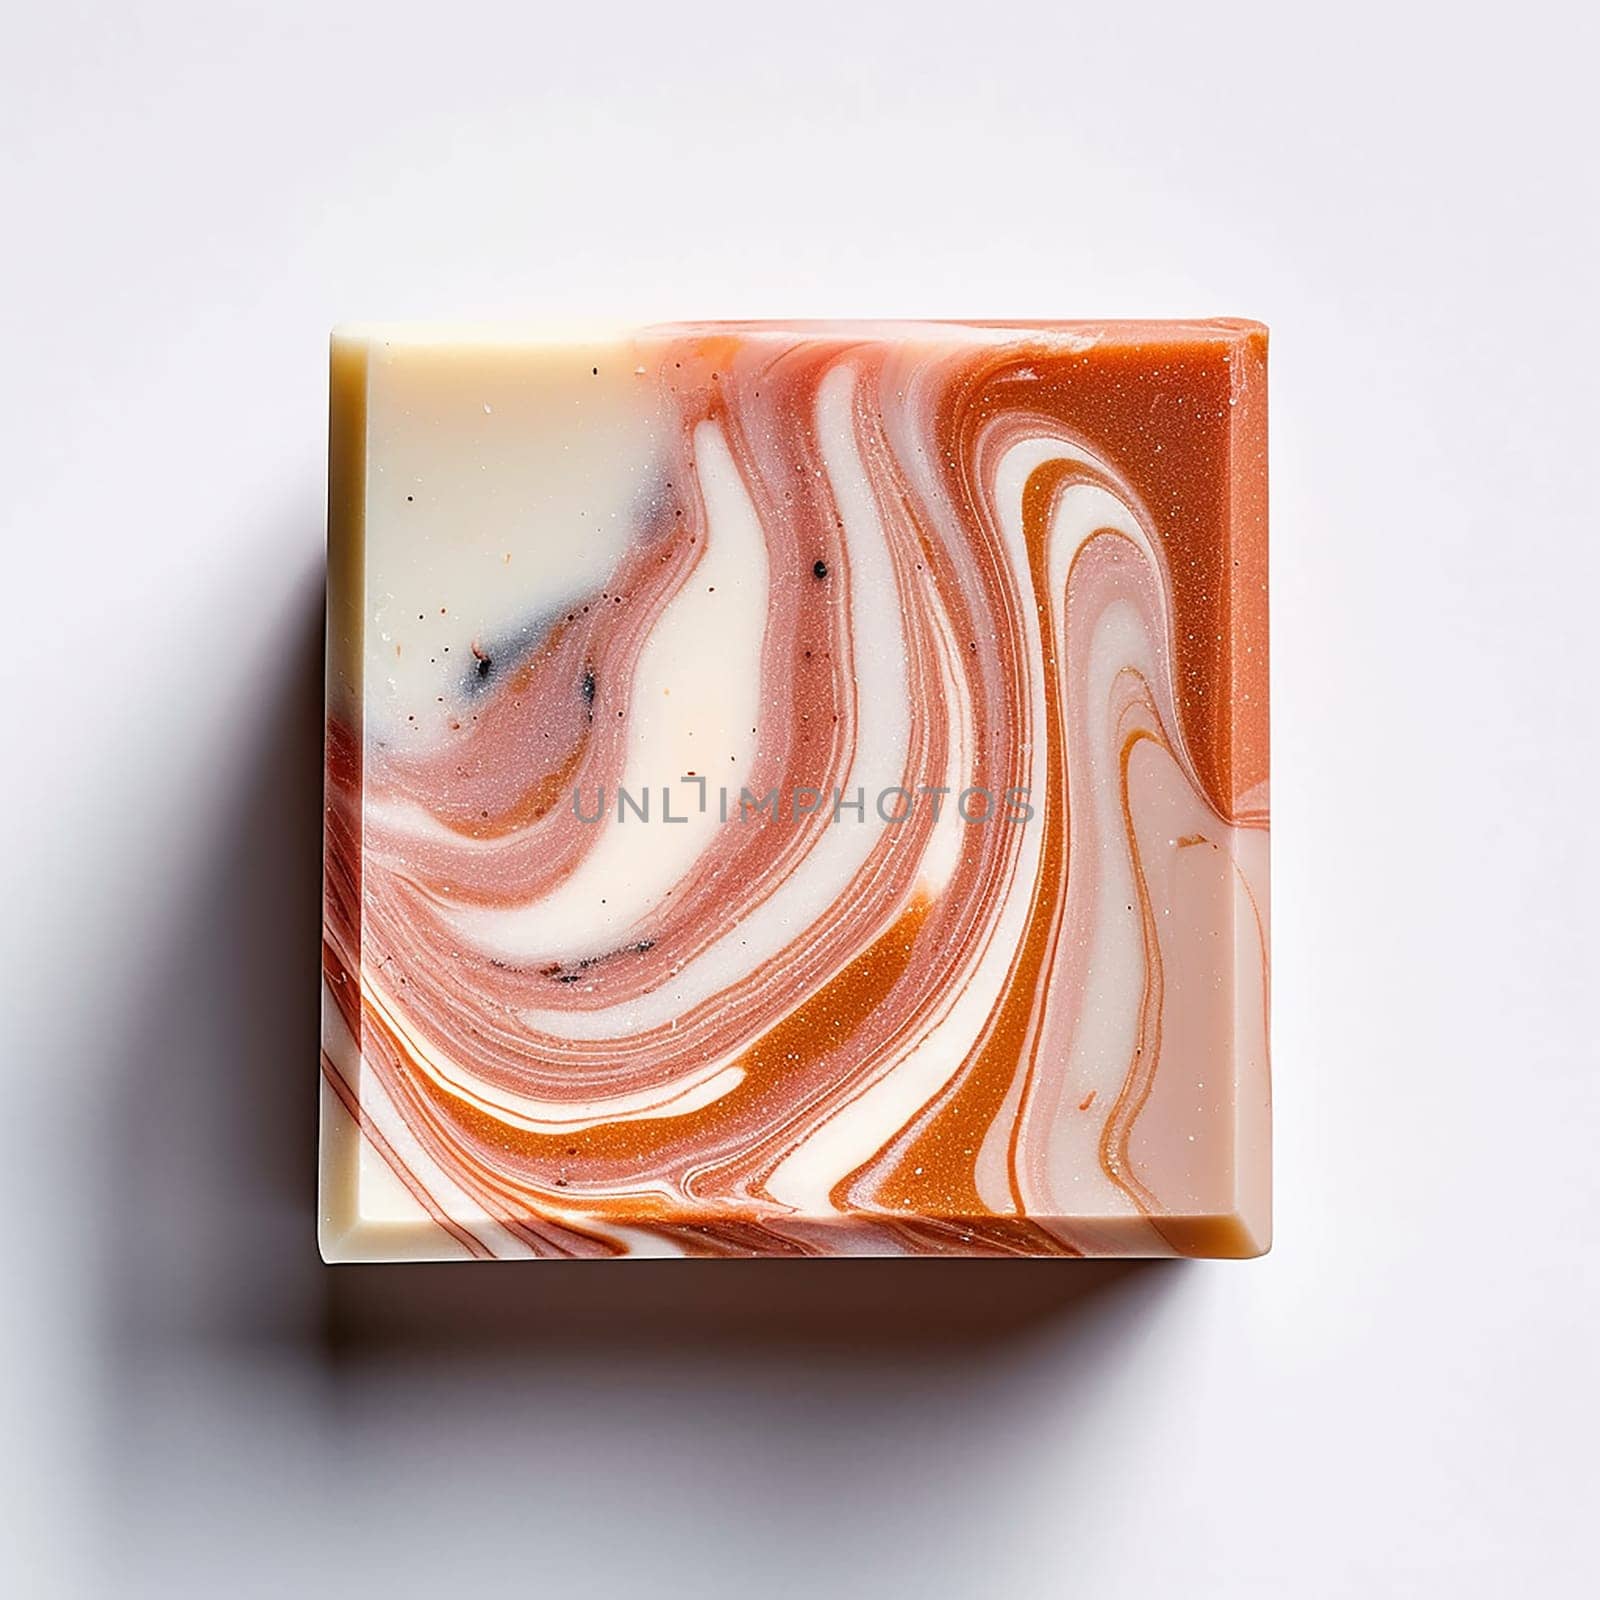 Handmade swirl patterned soap bar on a white background. by Hype2art